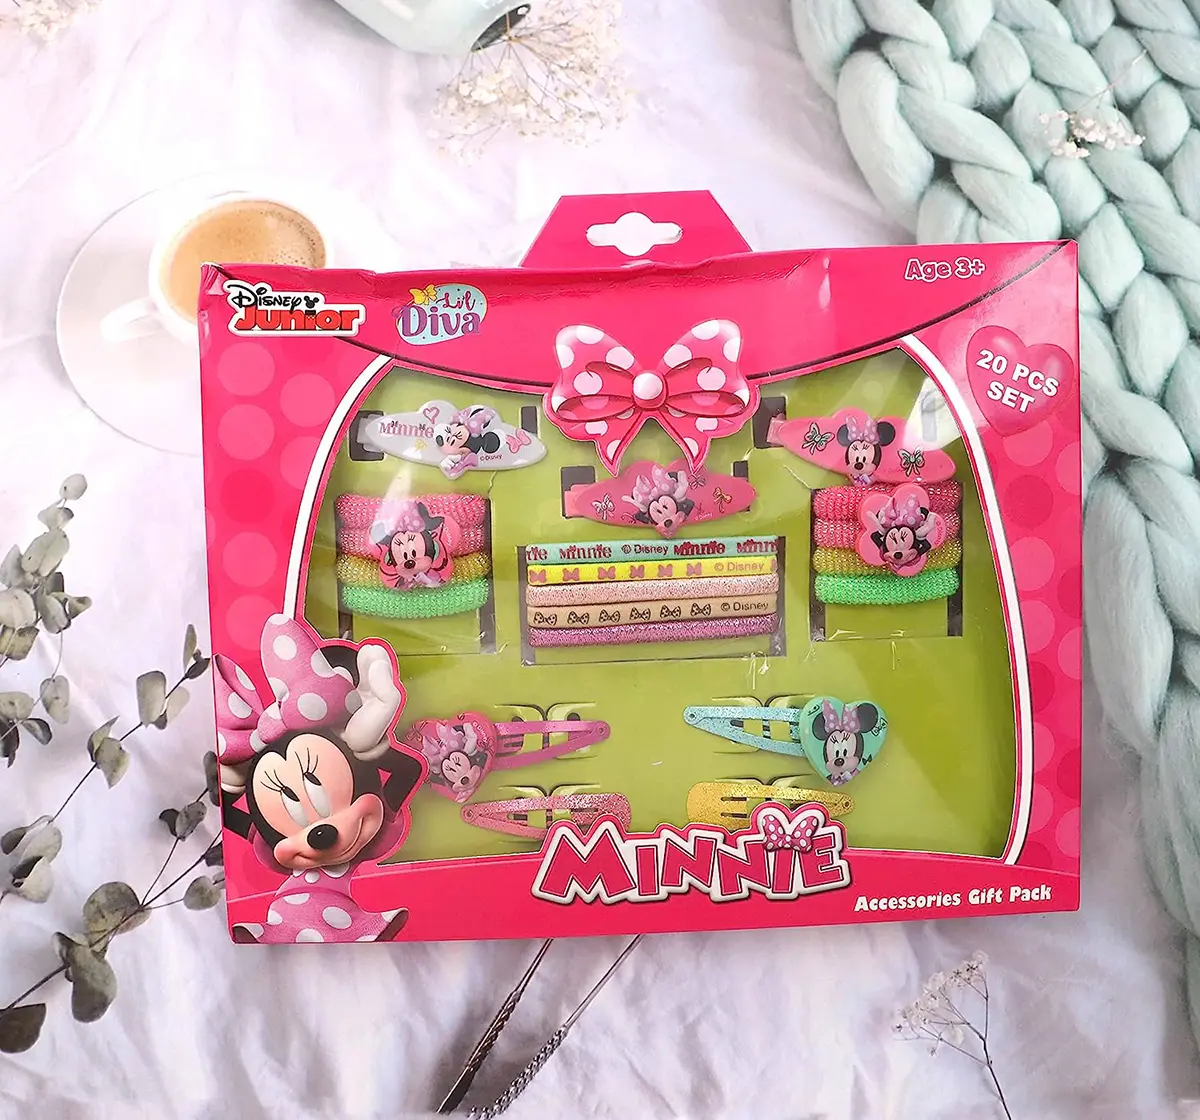 Li'l Diva Minnie Mouse Fashion Accessories Set of 20 Pieces For Girls of Age 3Y+, Multicolour